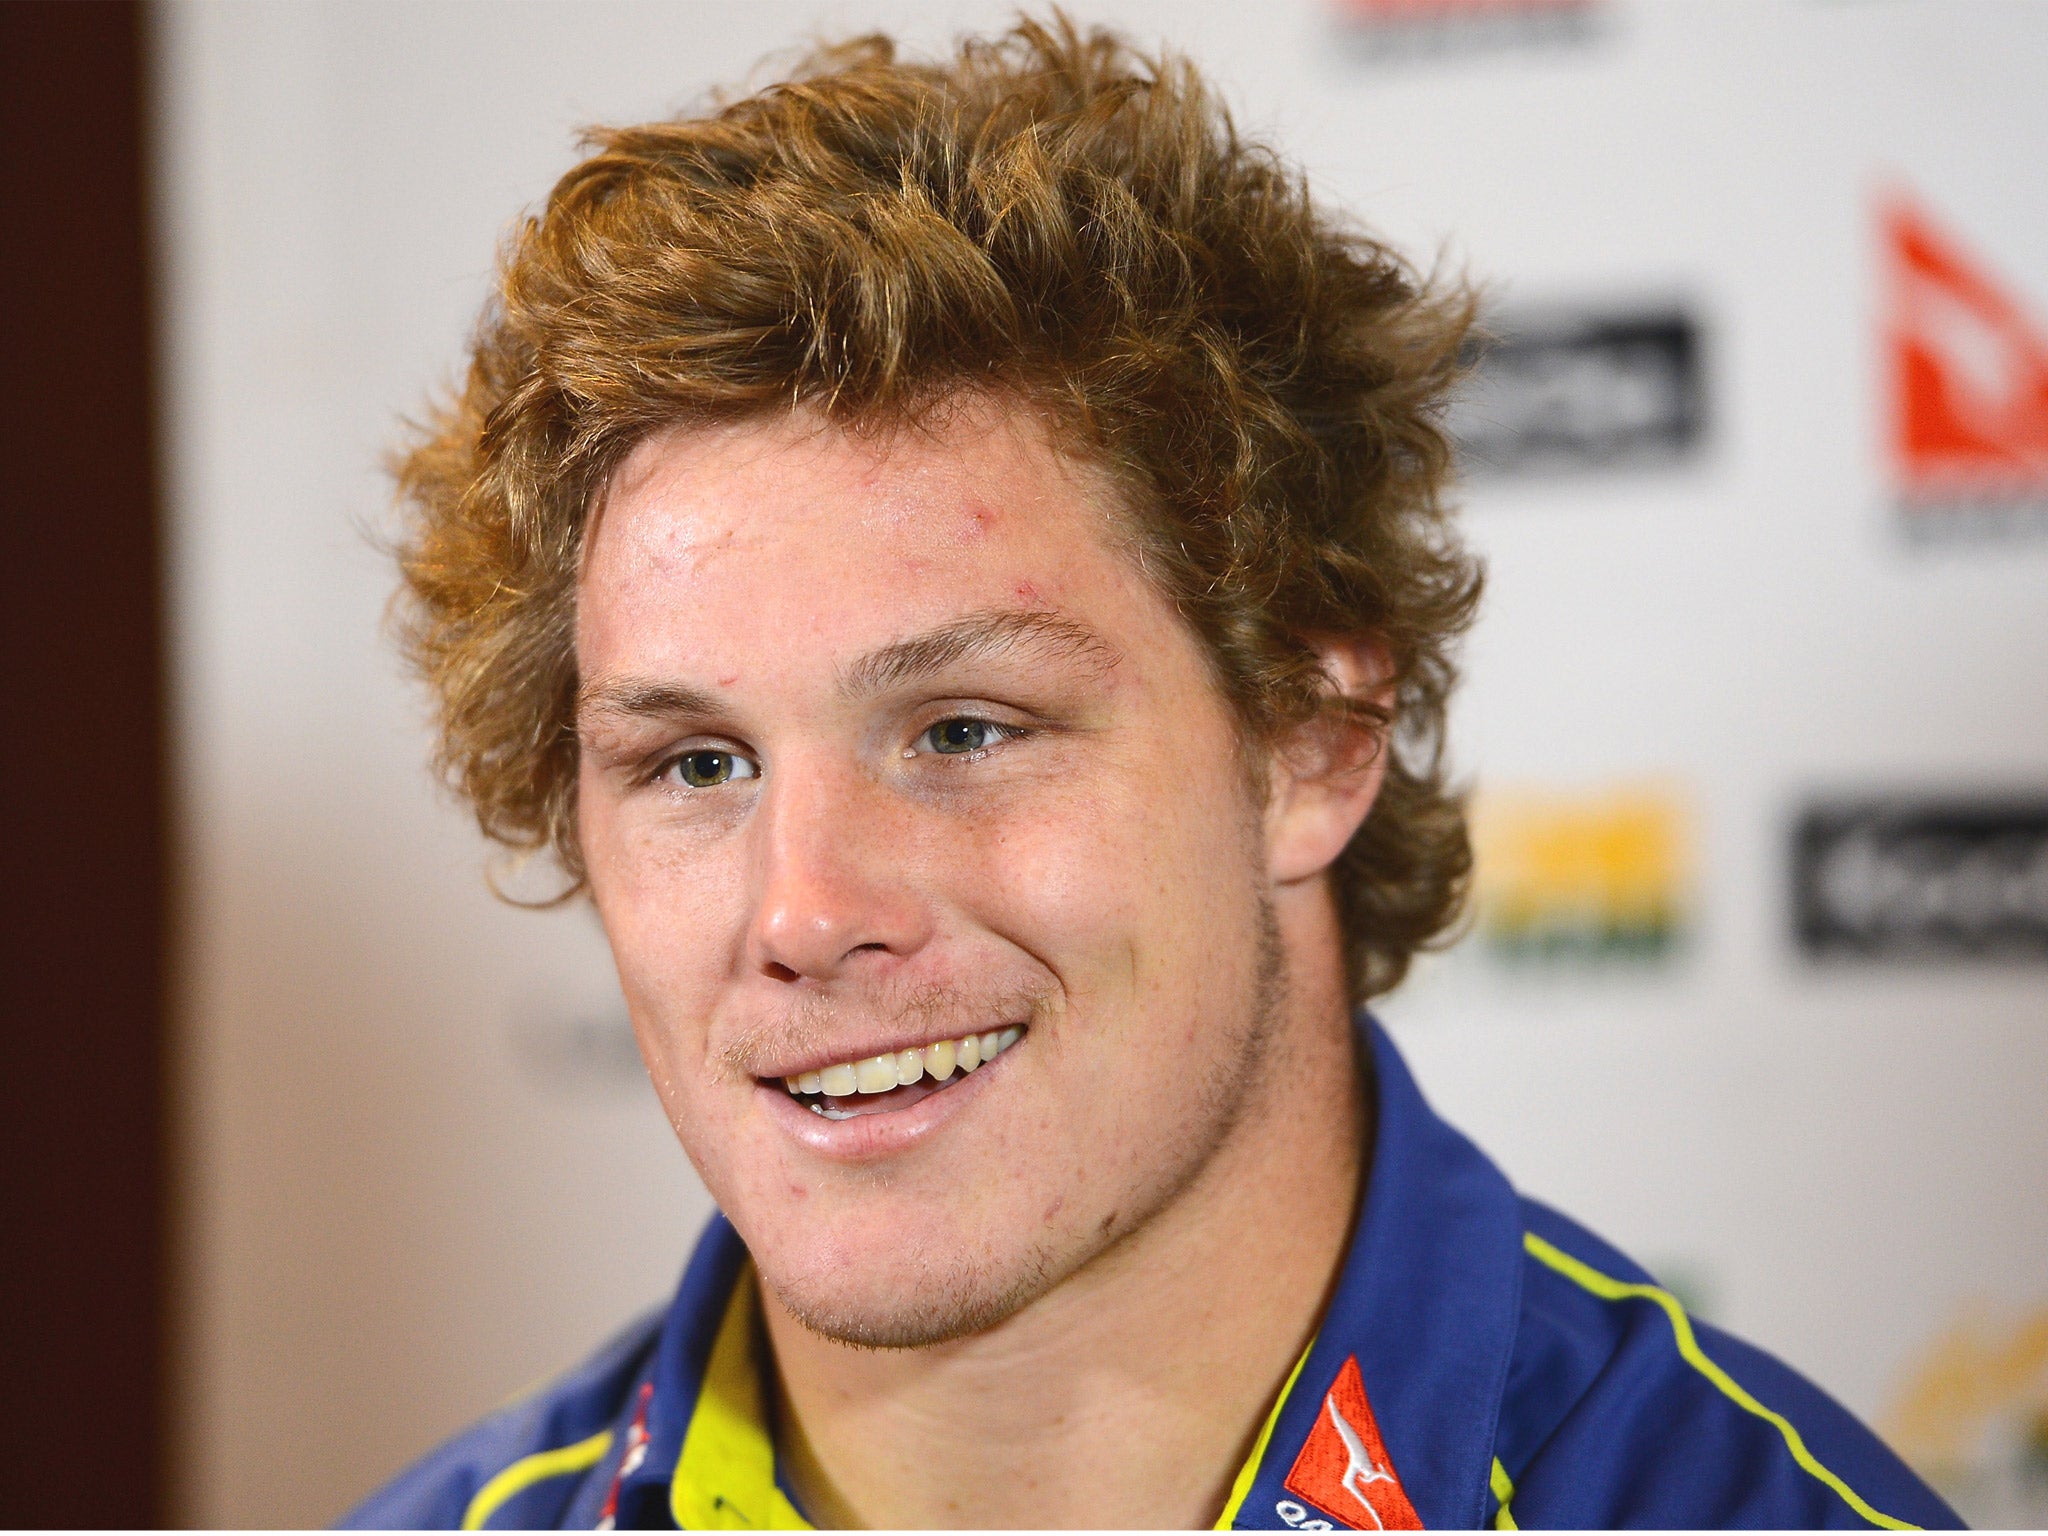 Michael Hooper said that he never considered playing for England